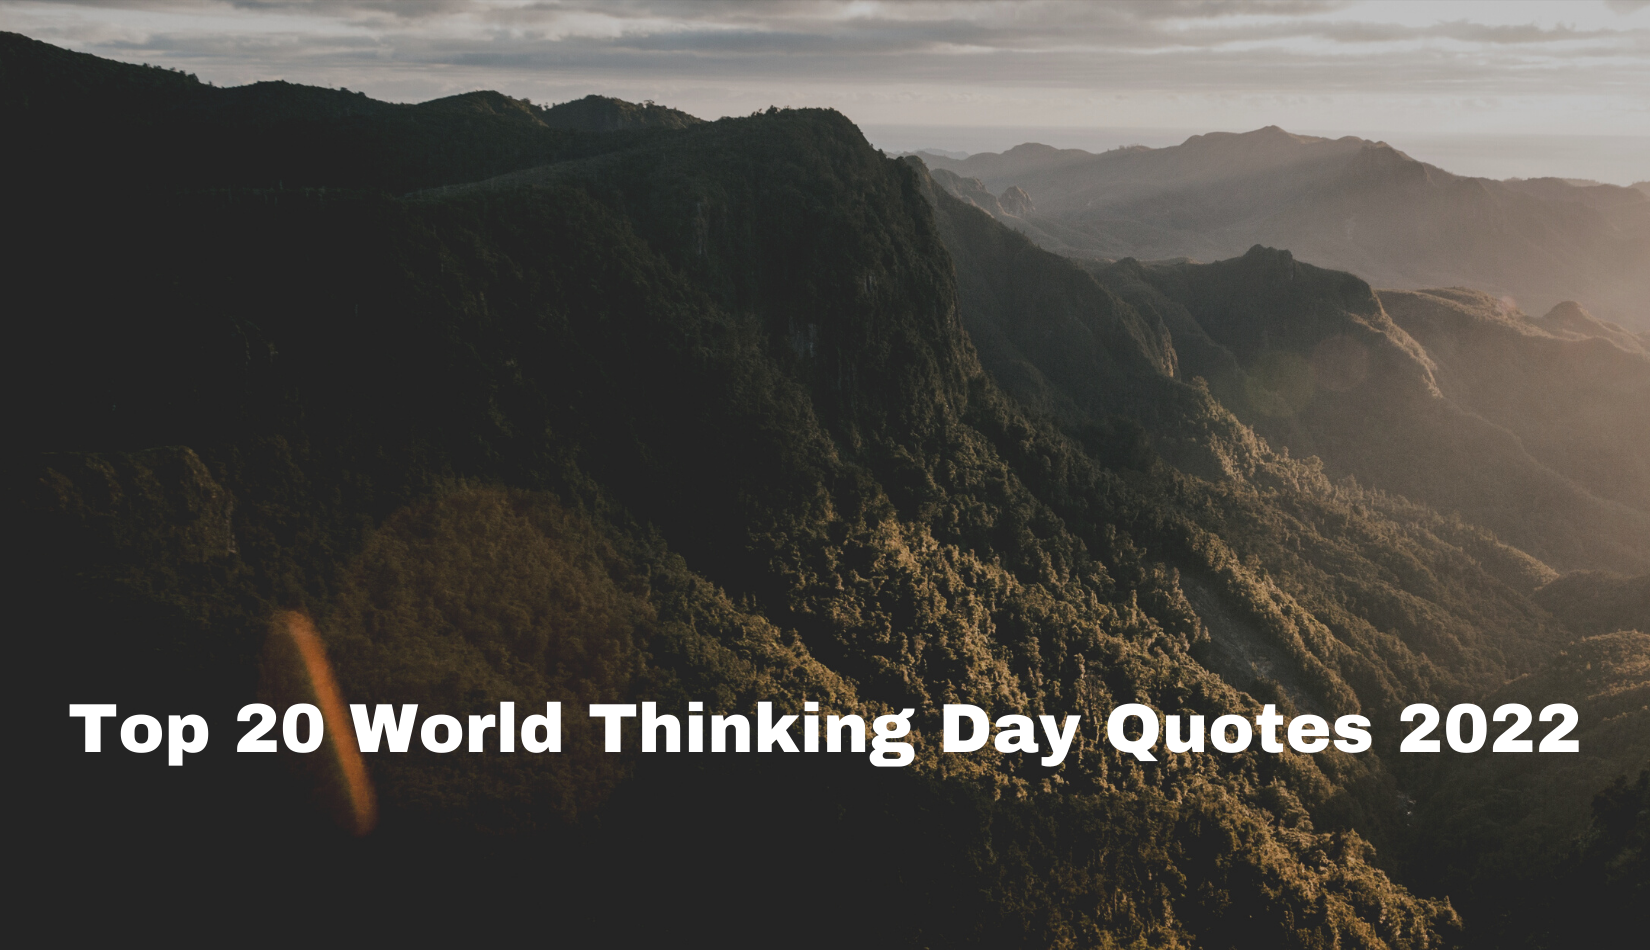 World Thinking Day Quotes 2022